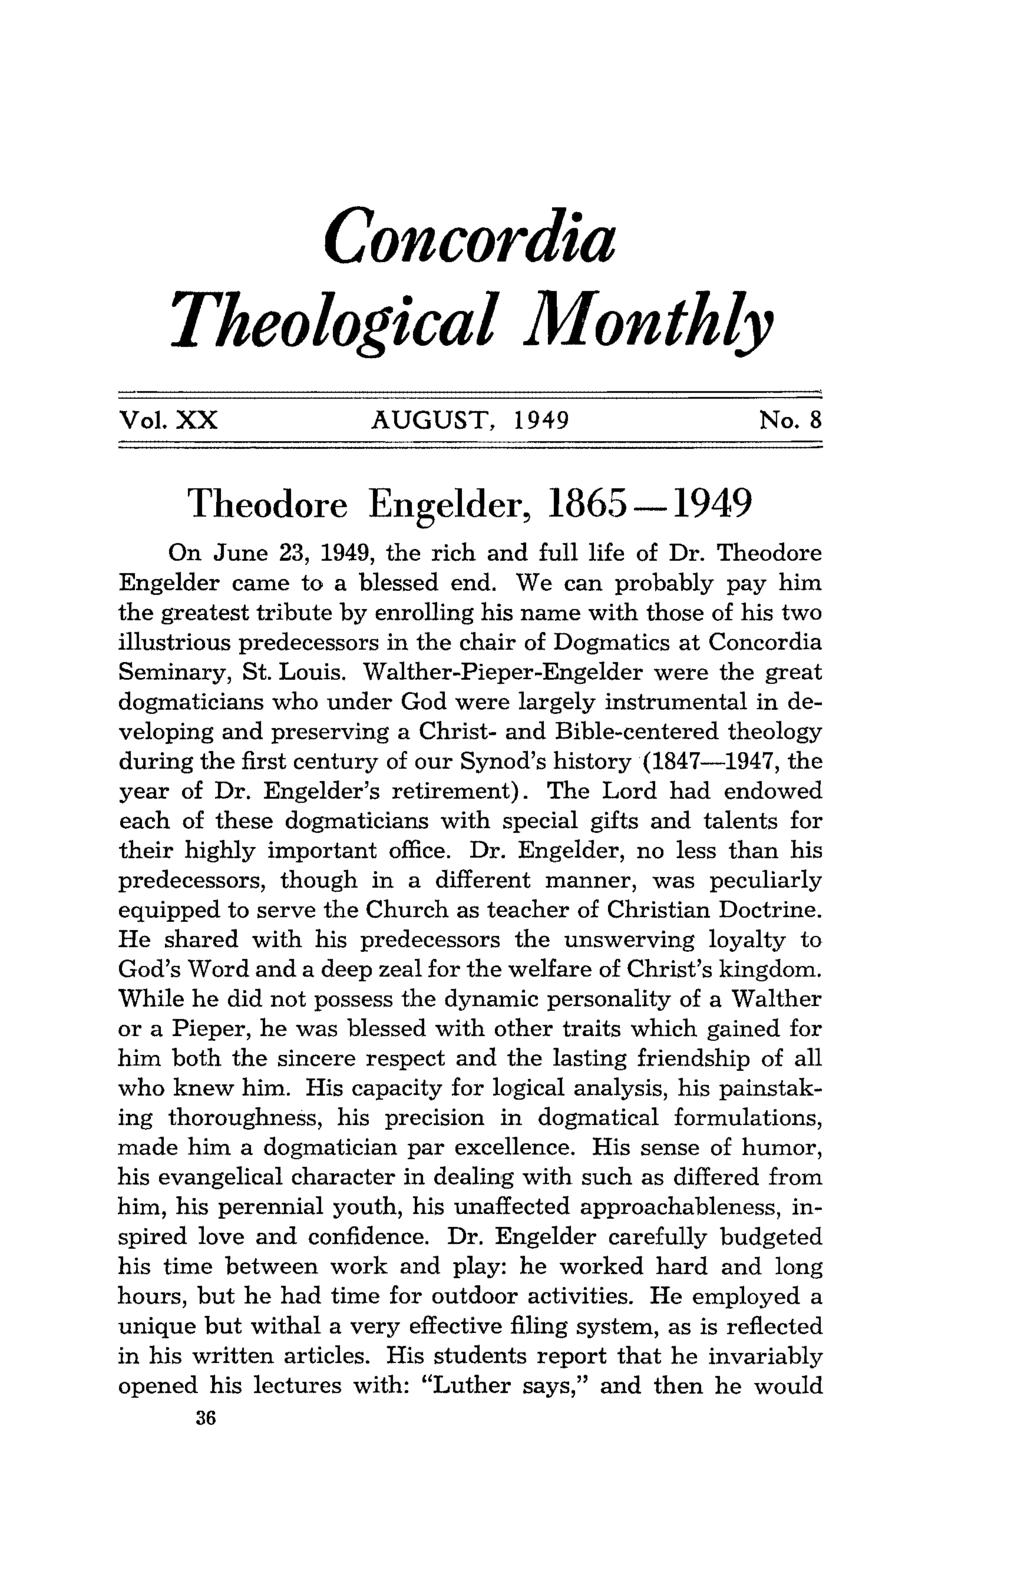 Concordia Theological Monthly Vol. xx AUGUST, 1949 No.8 Theodore Engelder, 1865-1949 On June 23, 1949, the rich and full life of Dr. Theodore Engelder came to a blessed end.